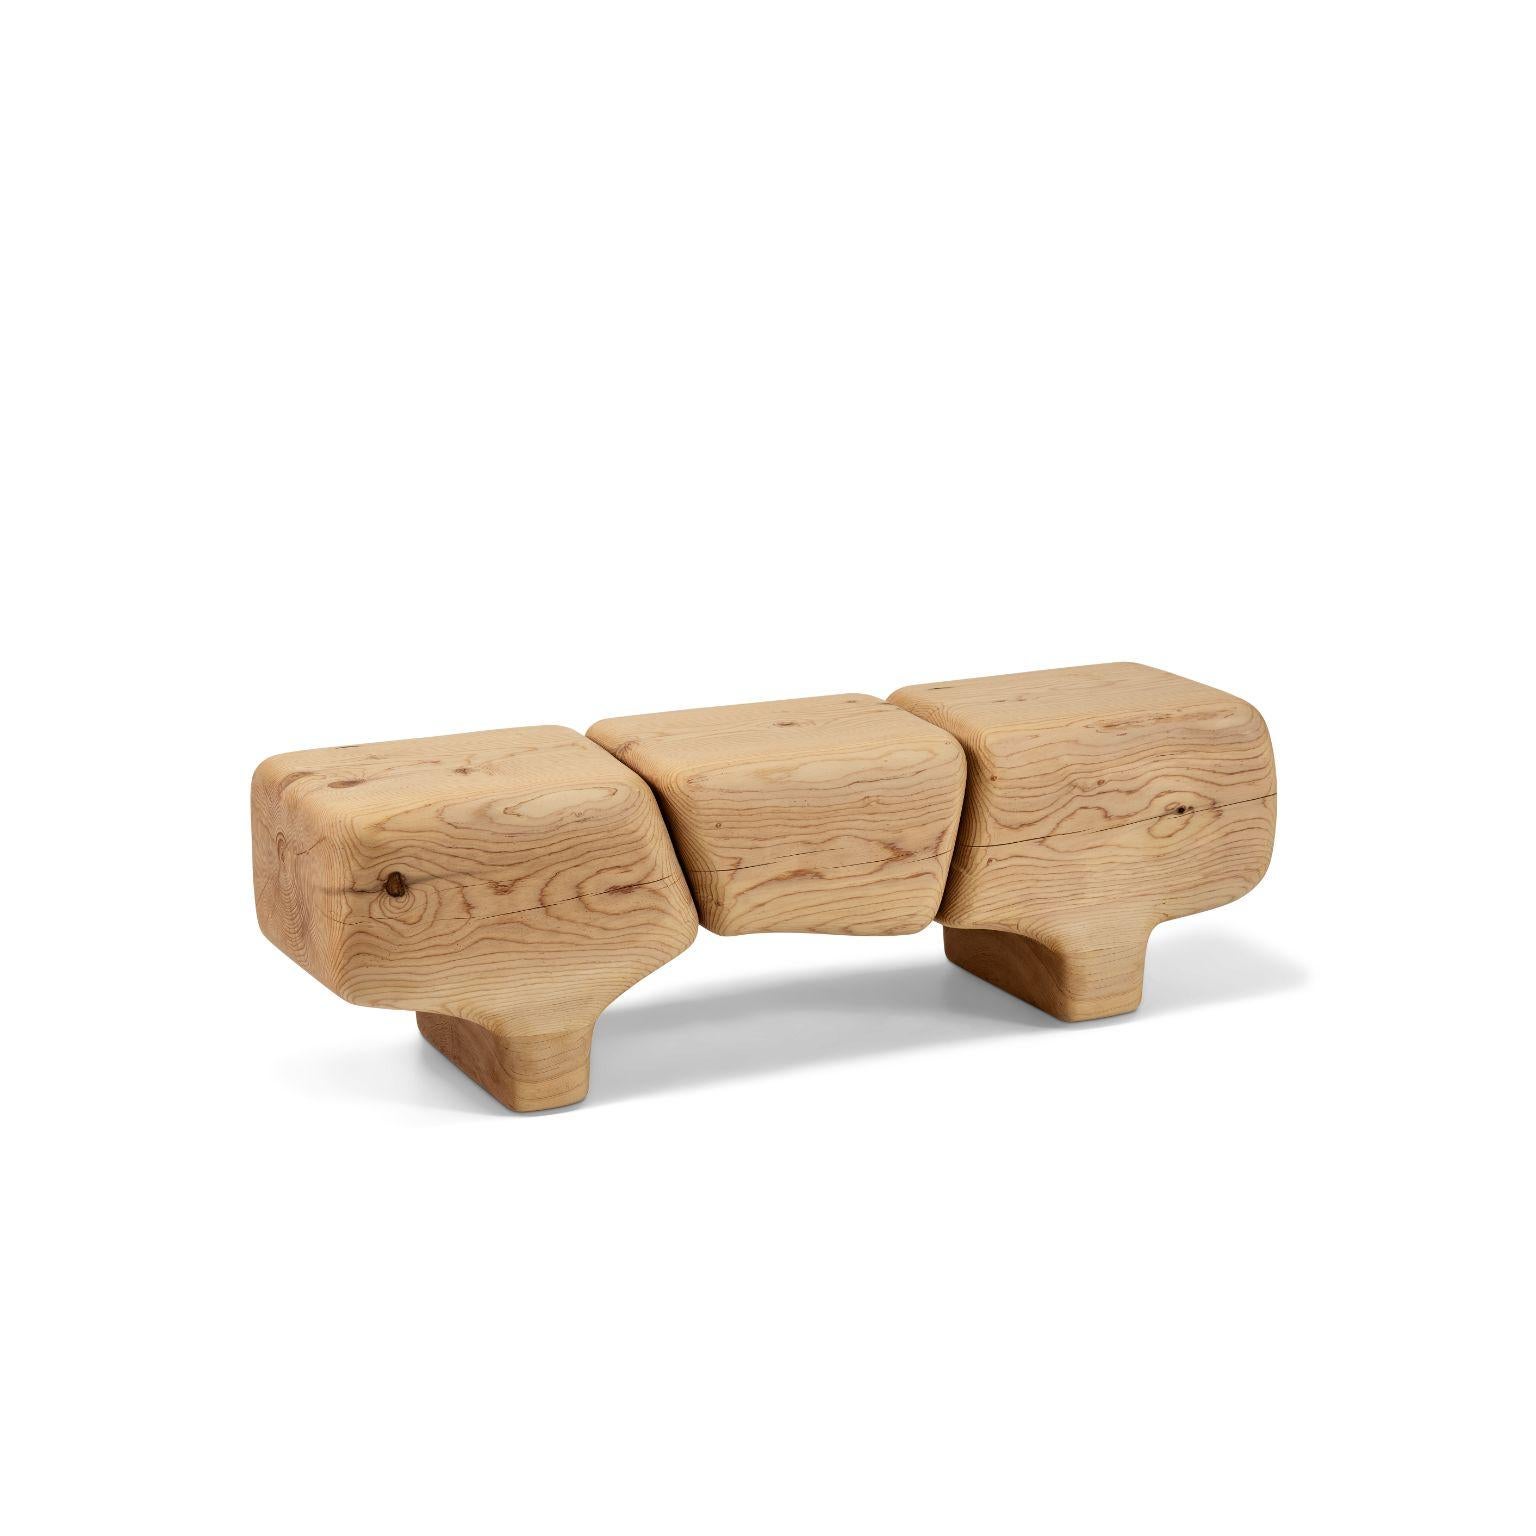 Turkish Aromatique Cedre Sculptural Bench by Contemporary Ecowood For Sale